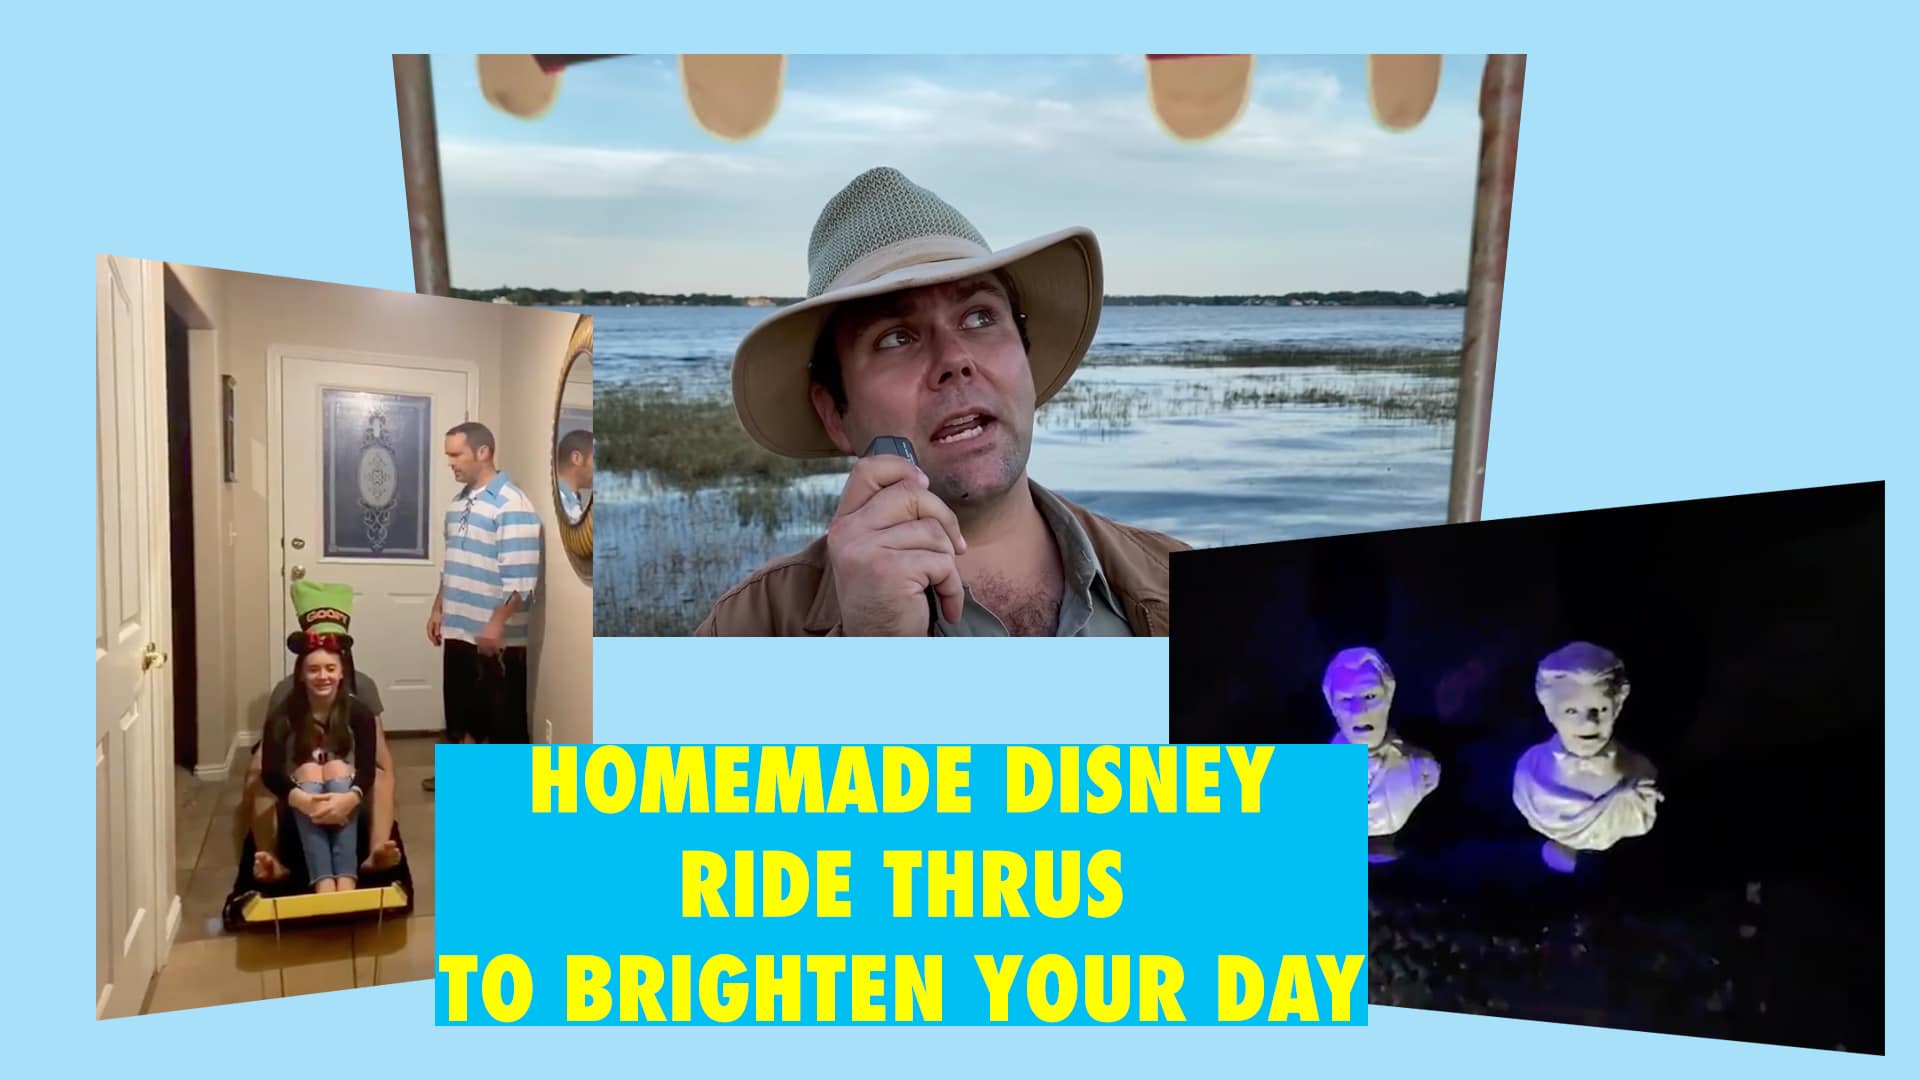 Homemade Disney Rides Made By Creative Families to Brighten Your Day